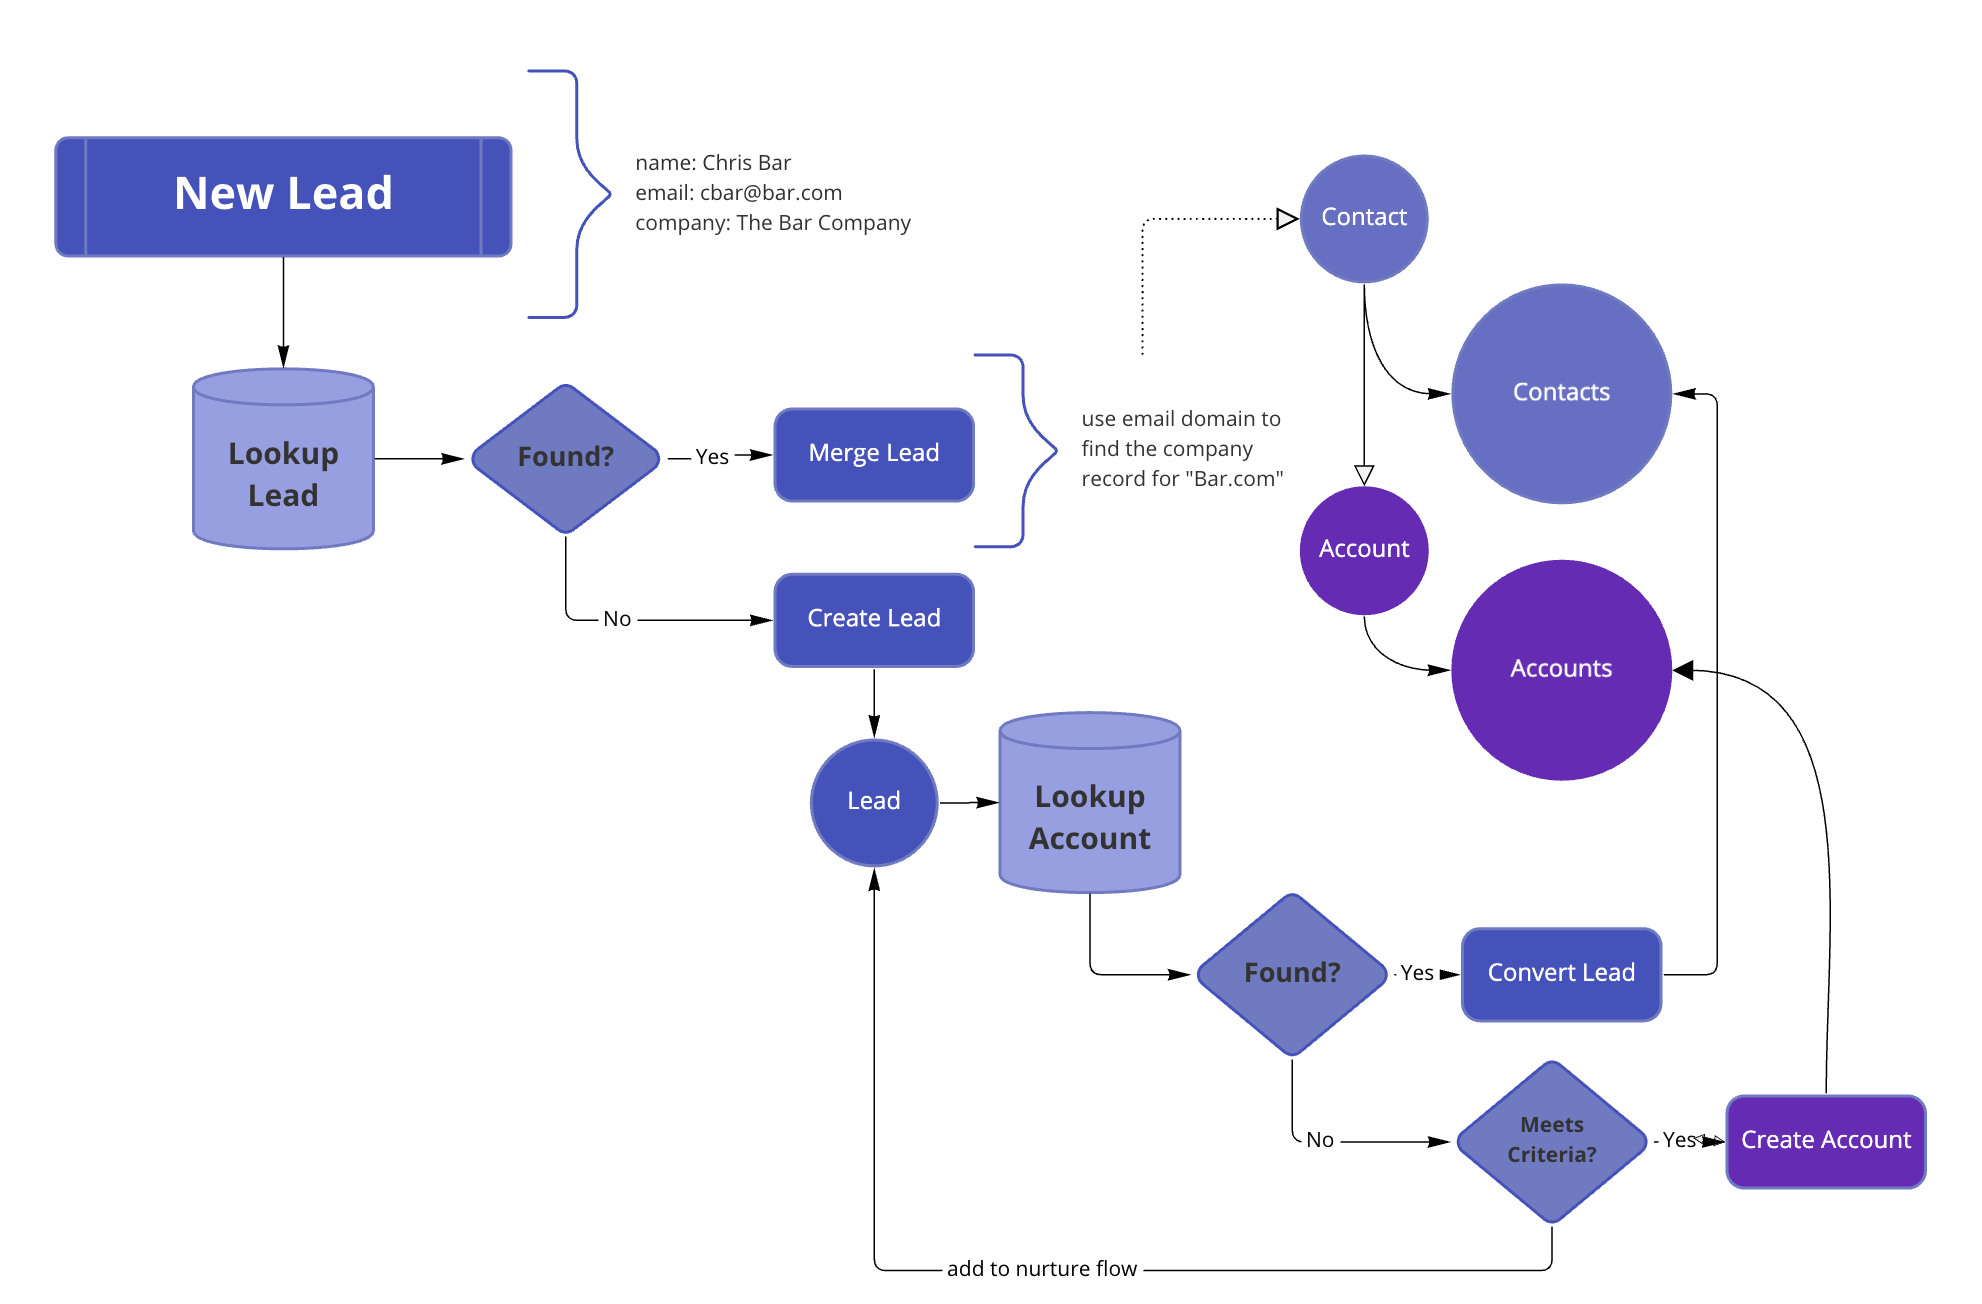 Processing Flow Chart